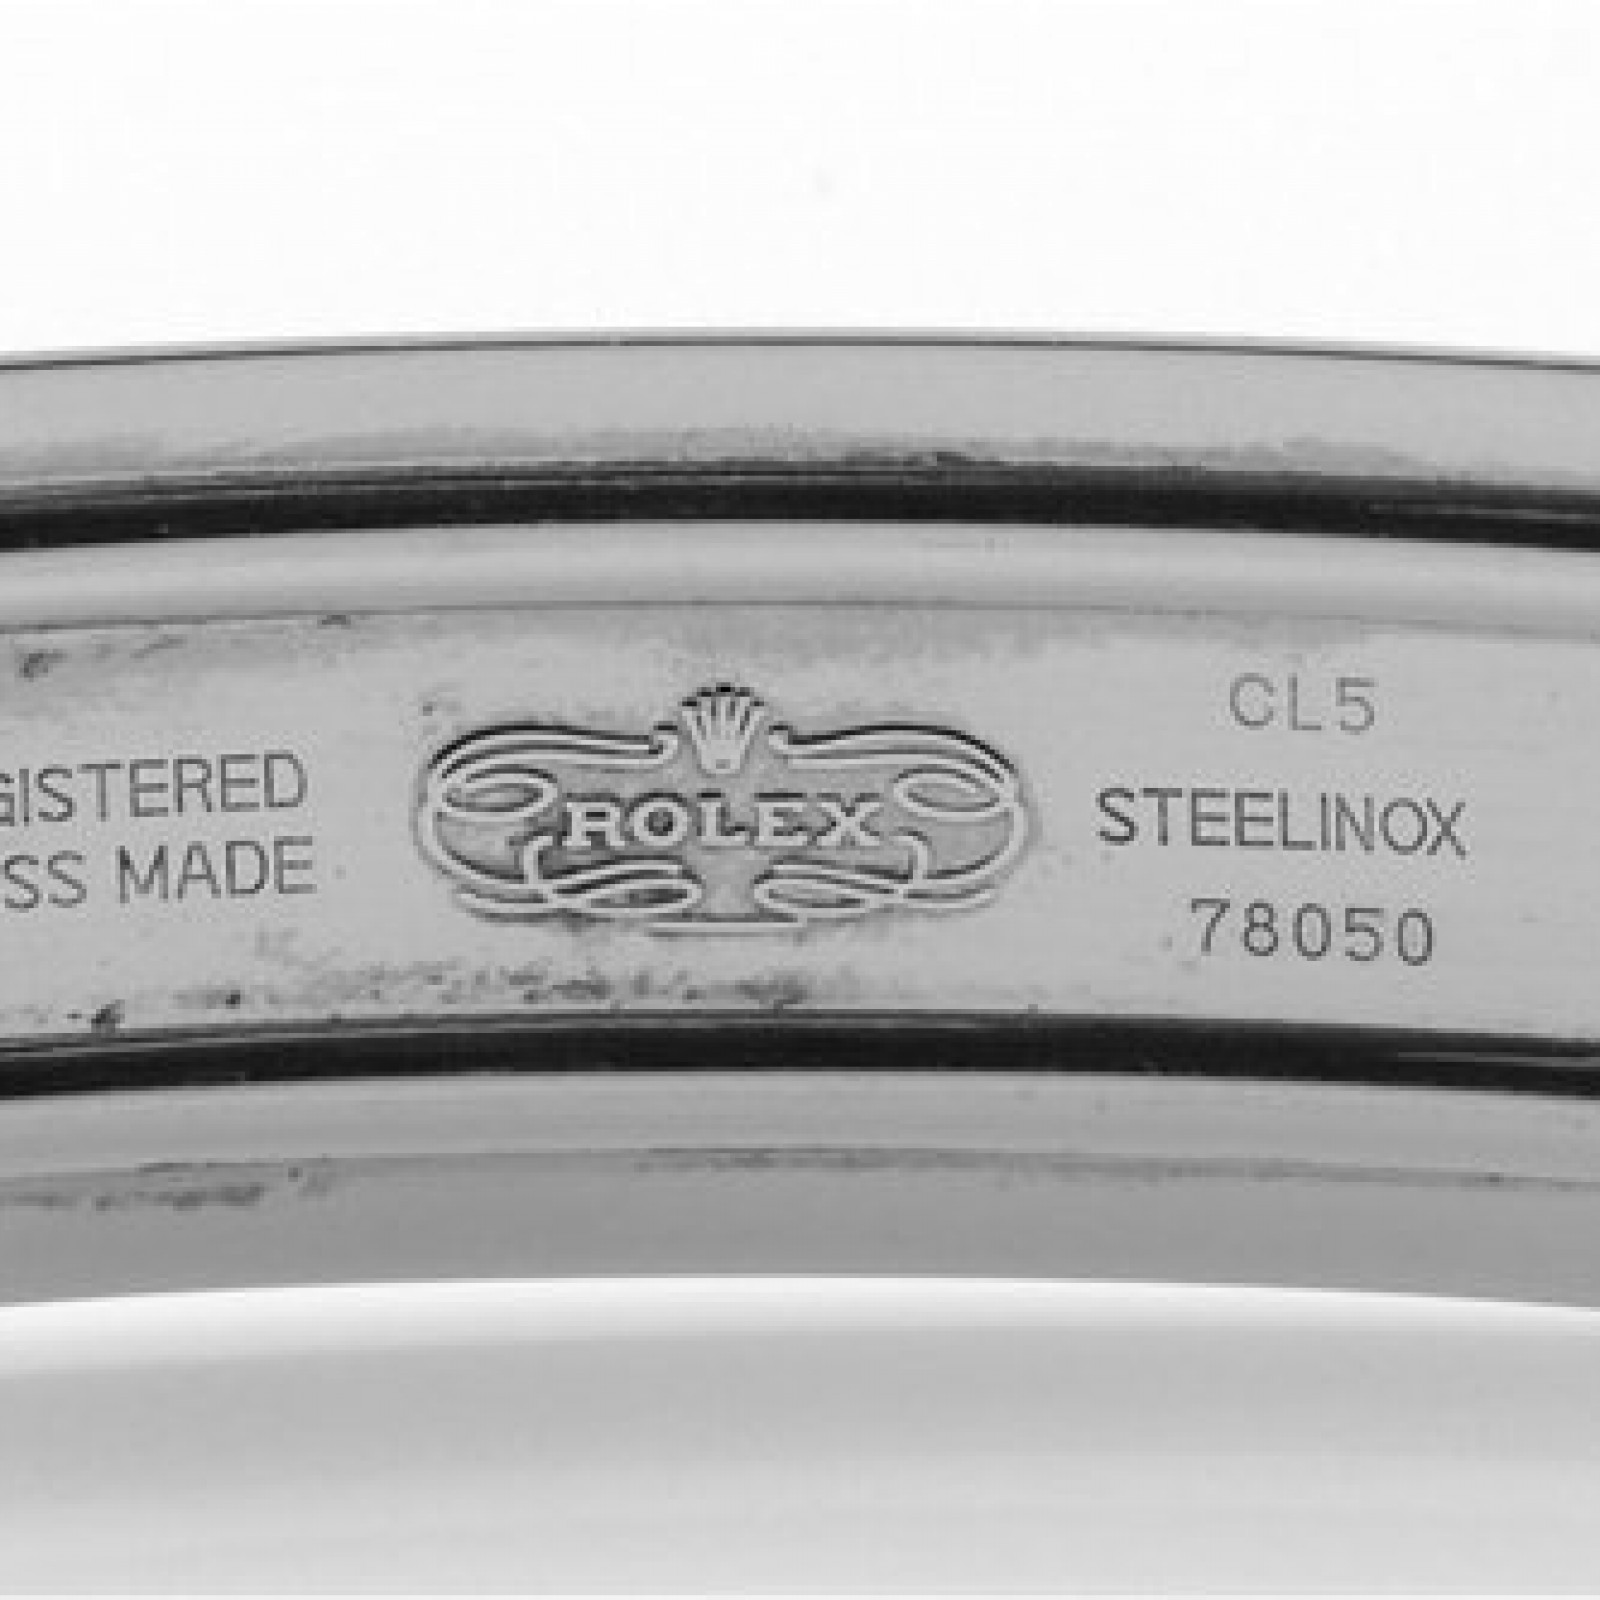 Used Rolex Oyster Perpetual 77080 Steel